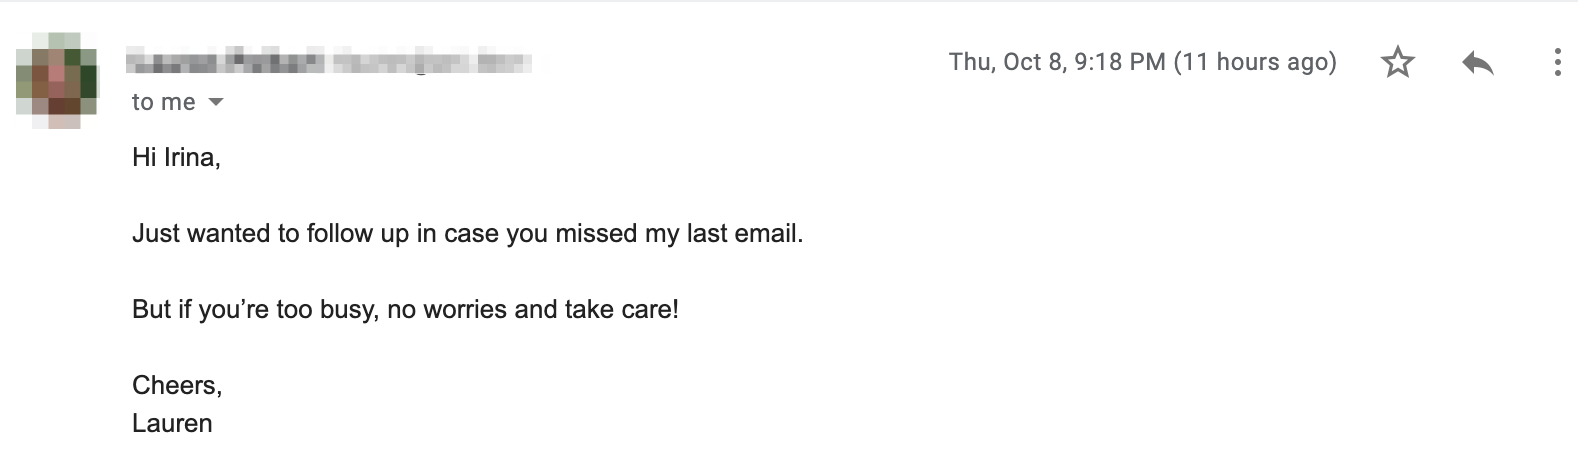 Follow-up email with no value